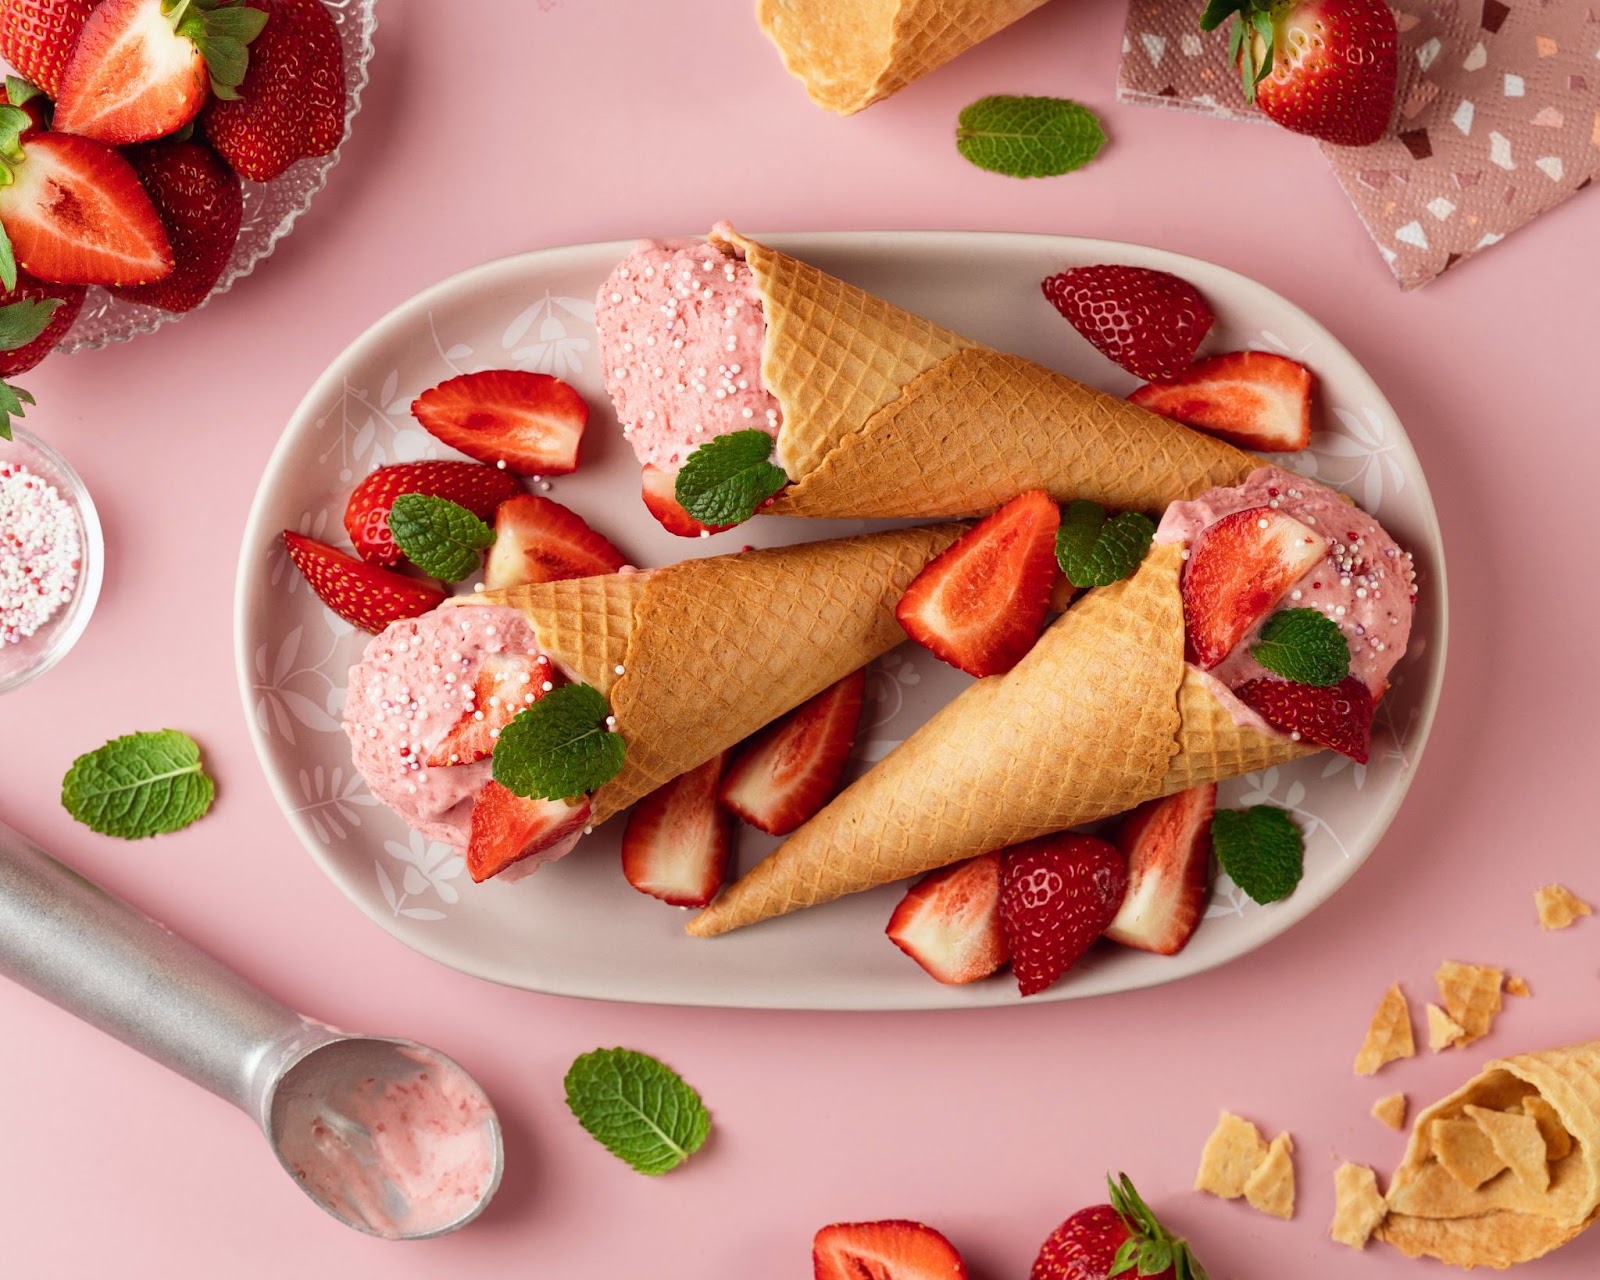 a table display of three ice cream waffle cones with strawberry ice cream, surrounded by strawberry halves and mint leaves on a pink surface